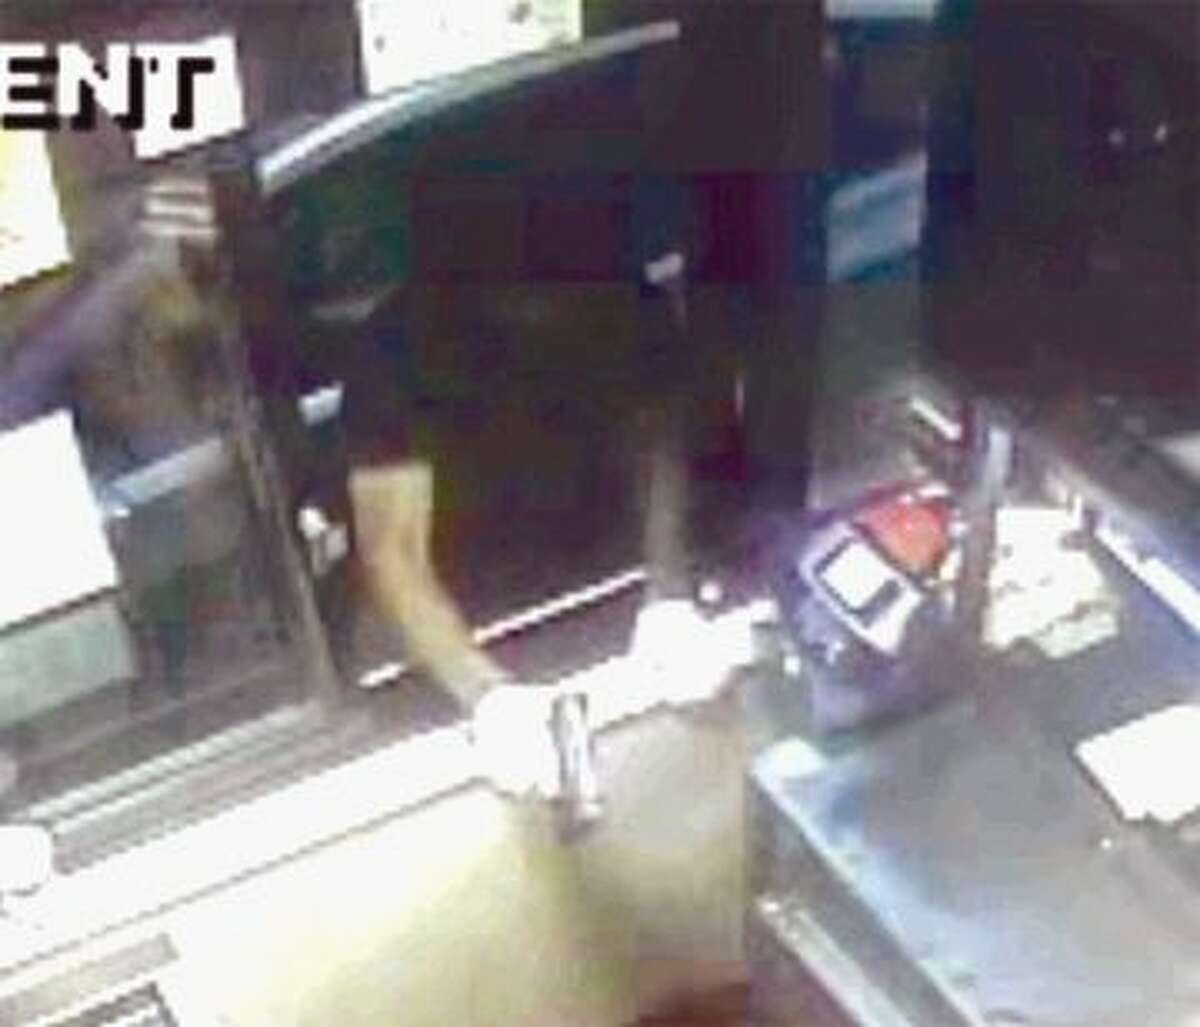 Police released this video still image of the robbery at the McDonald’s in Panther Creek in The Woodlands. The Montgomery County Crime Stoppers are offering a $1,000 cash reward for any tips that lead to an arrest or an indictment.